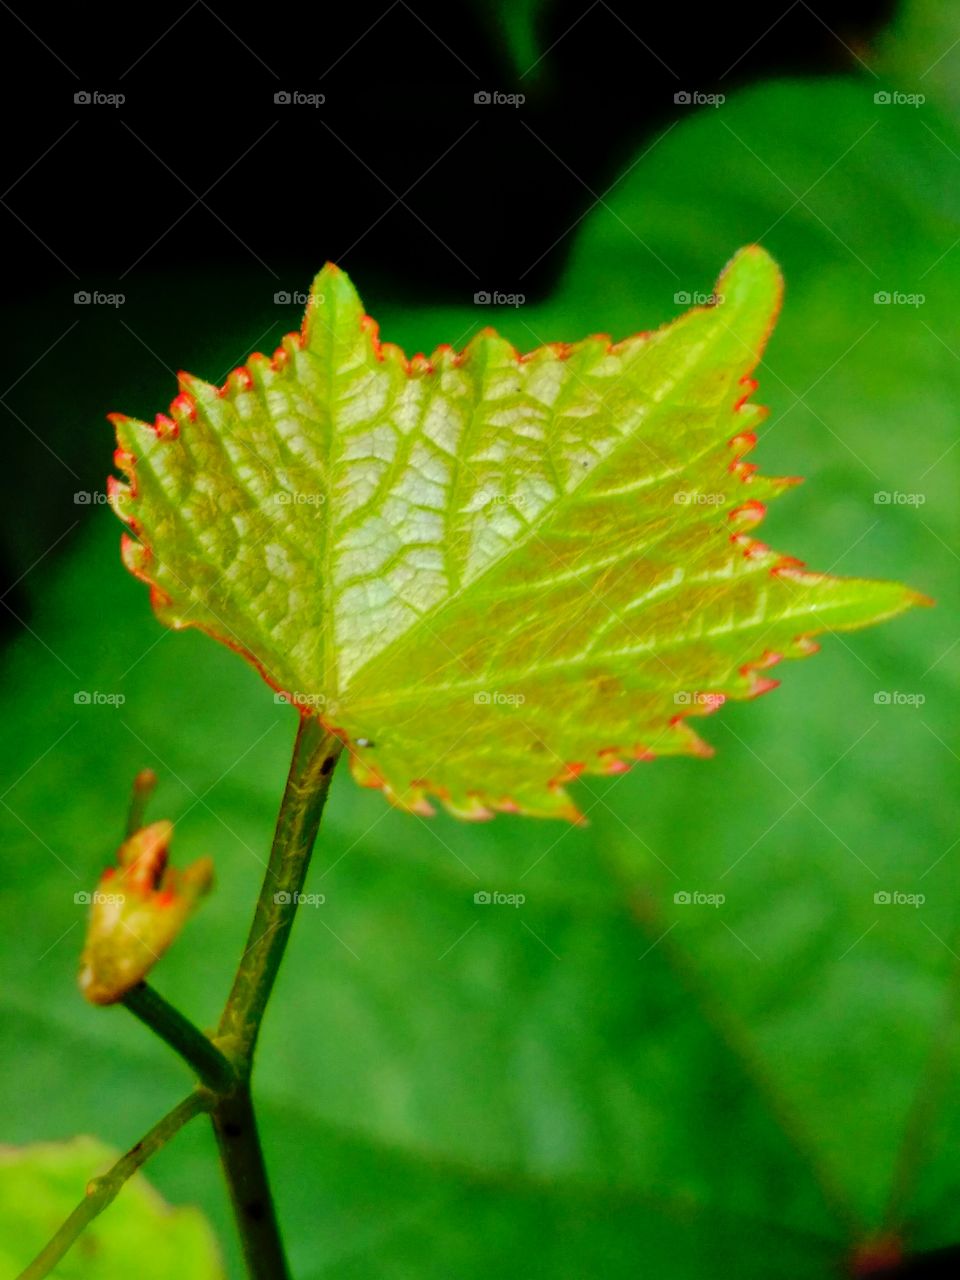 Leaf and the change in colour